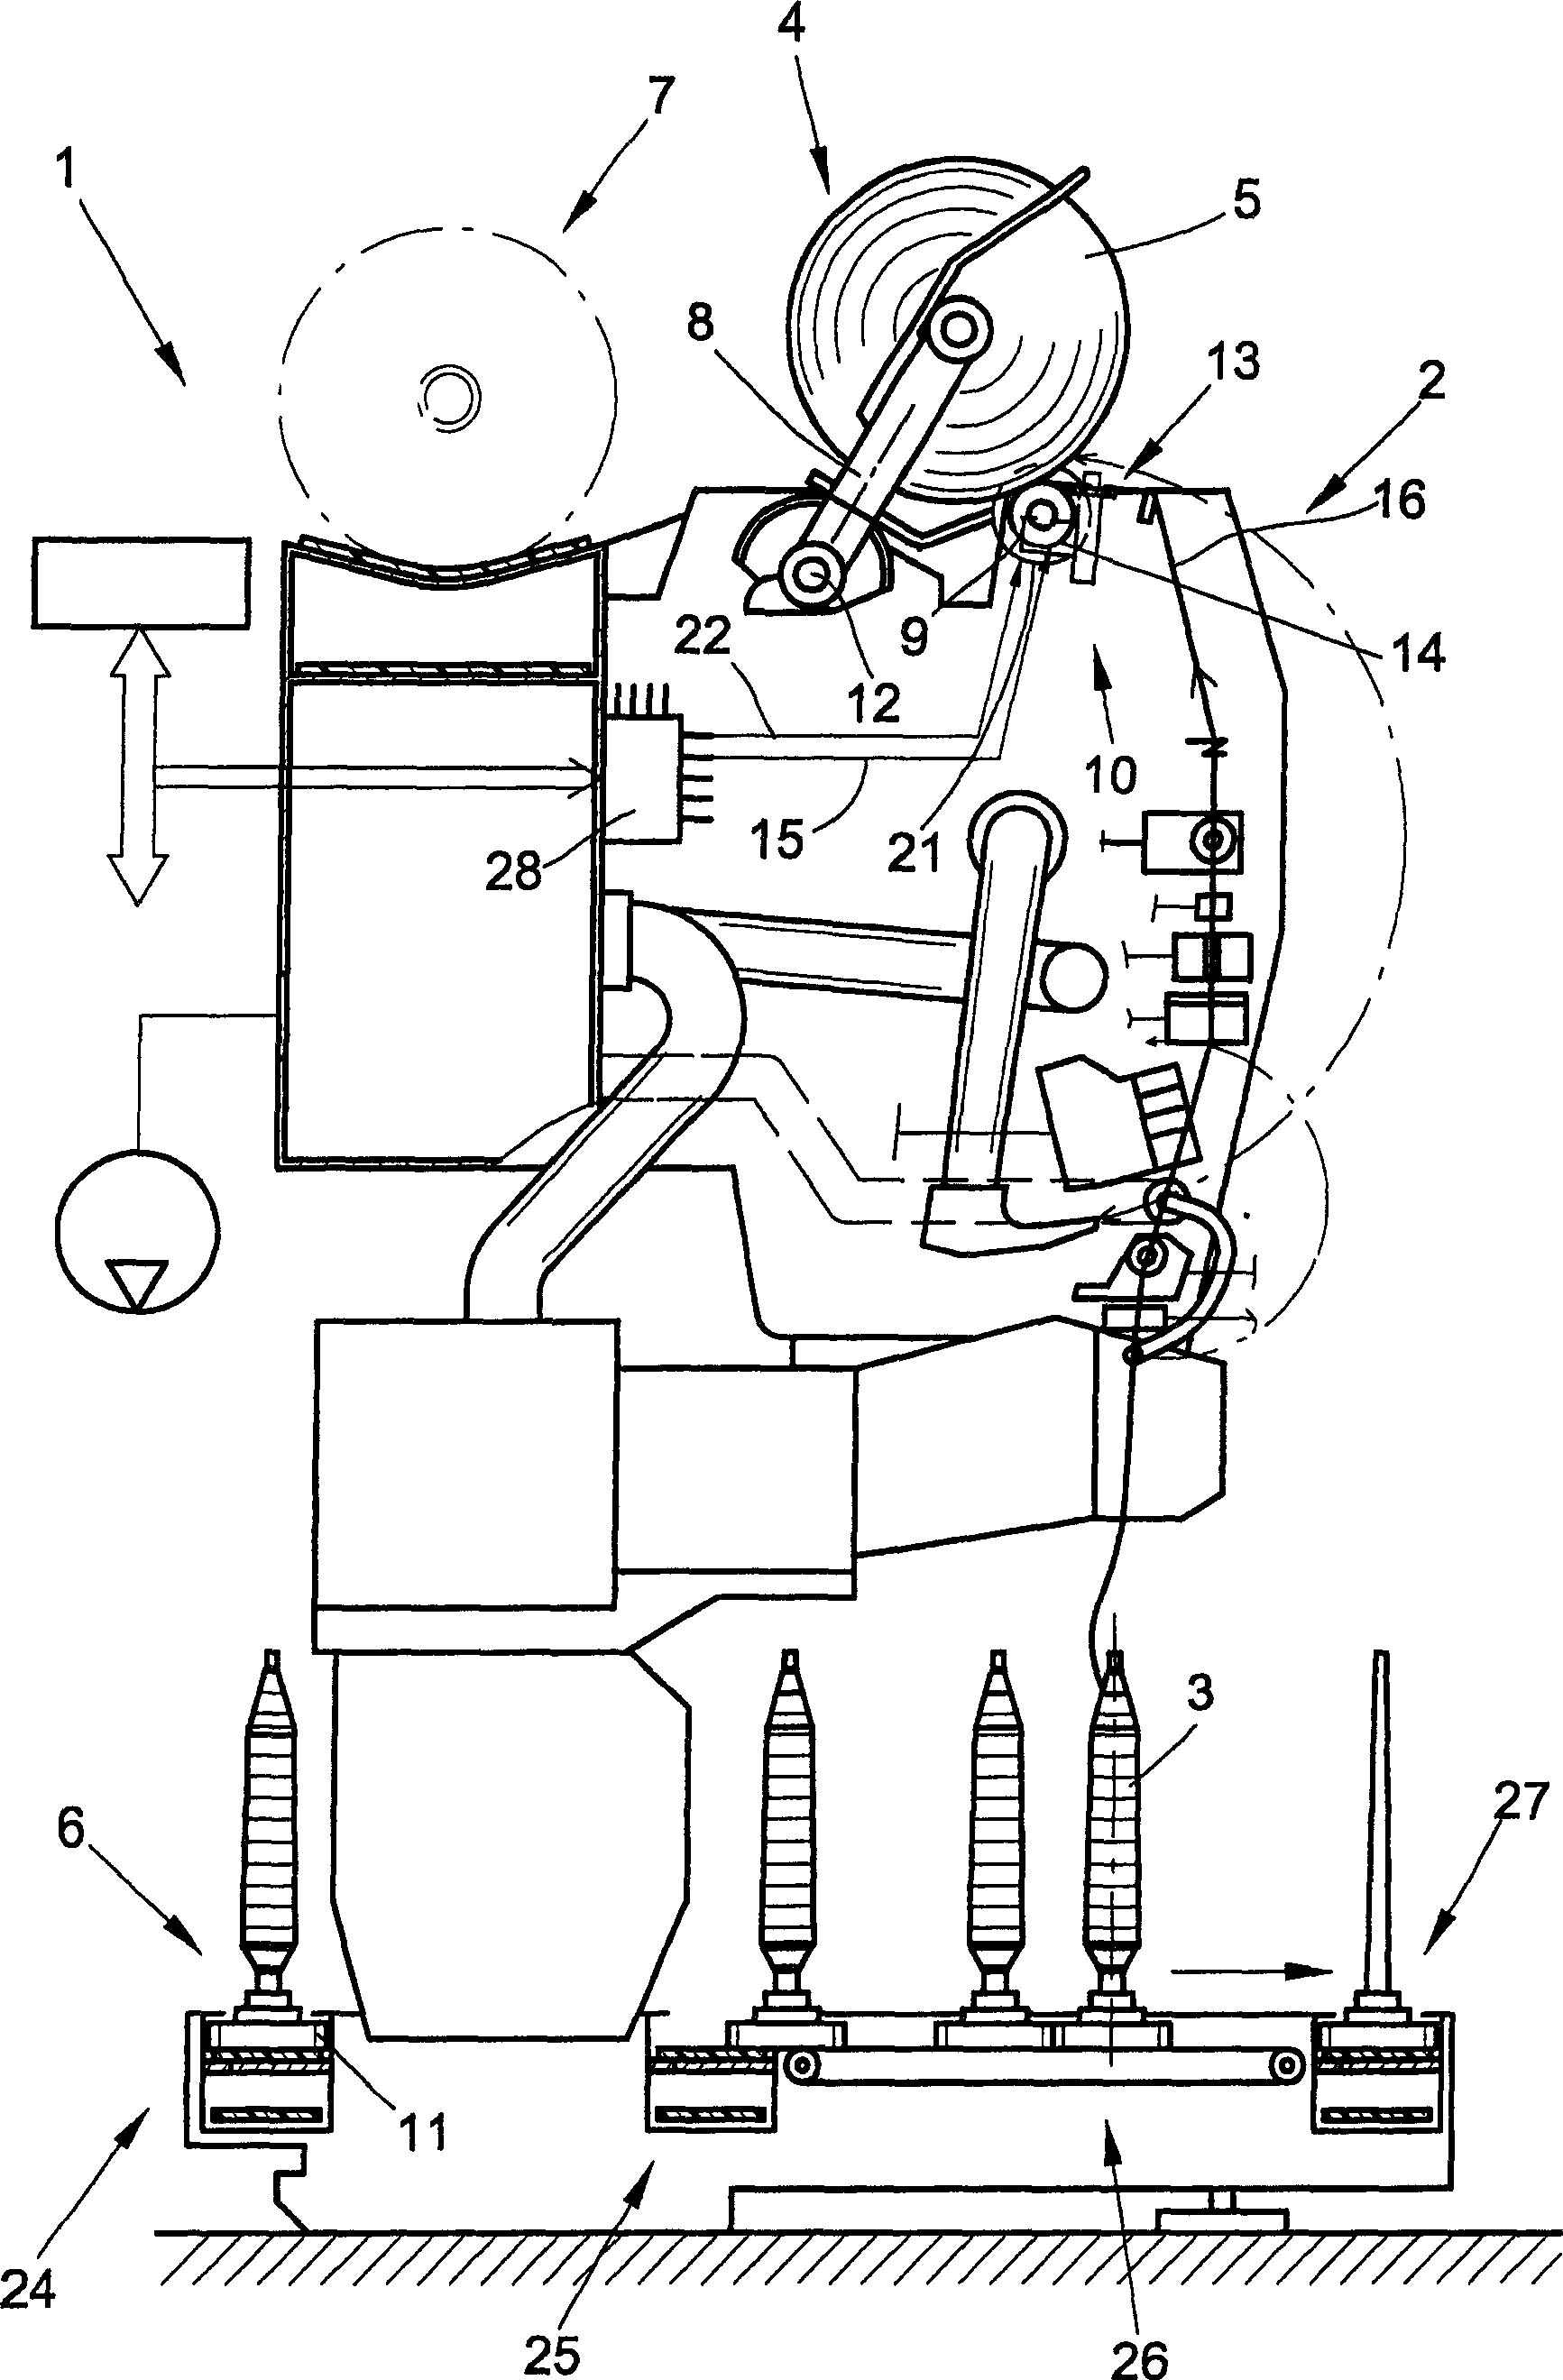 Yarn traversing device for a winding device of a textile machine producing cross-wound bobbins